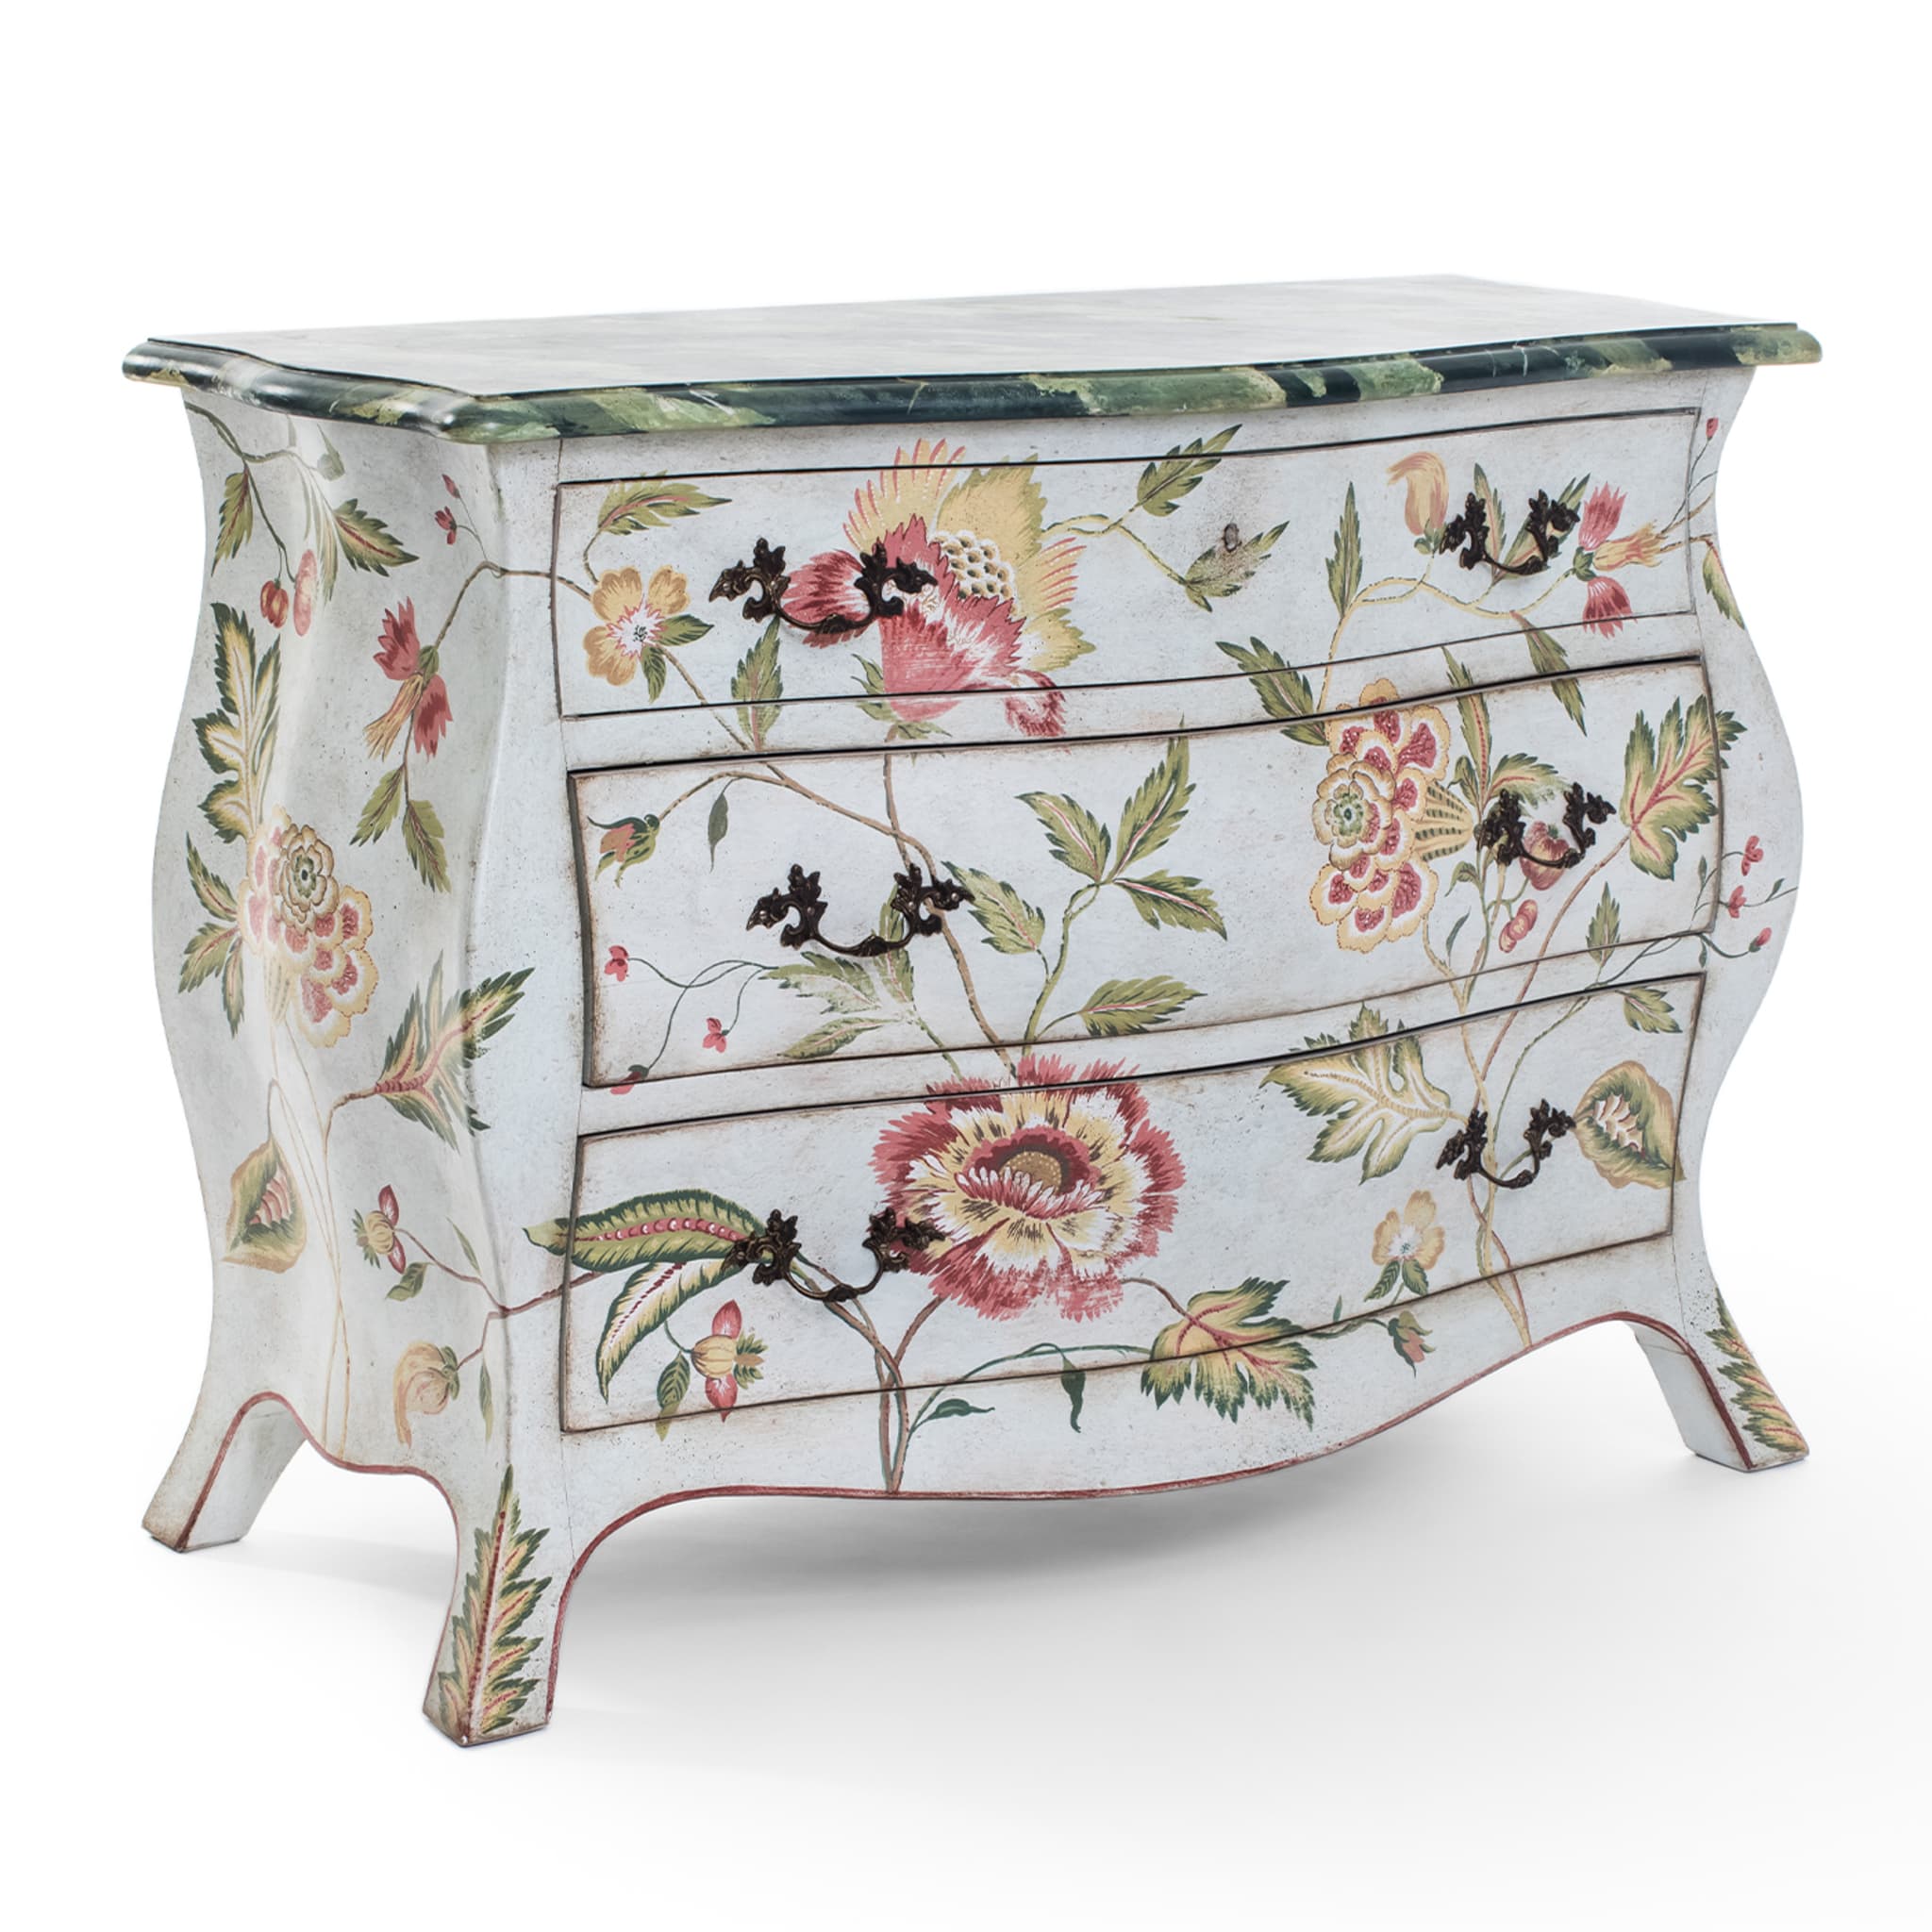 Asolo Jacobean Decor Chest of Drawers - Alternative view 1